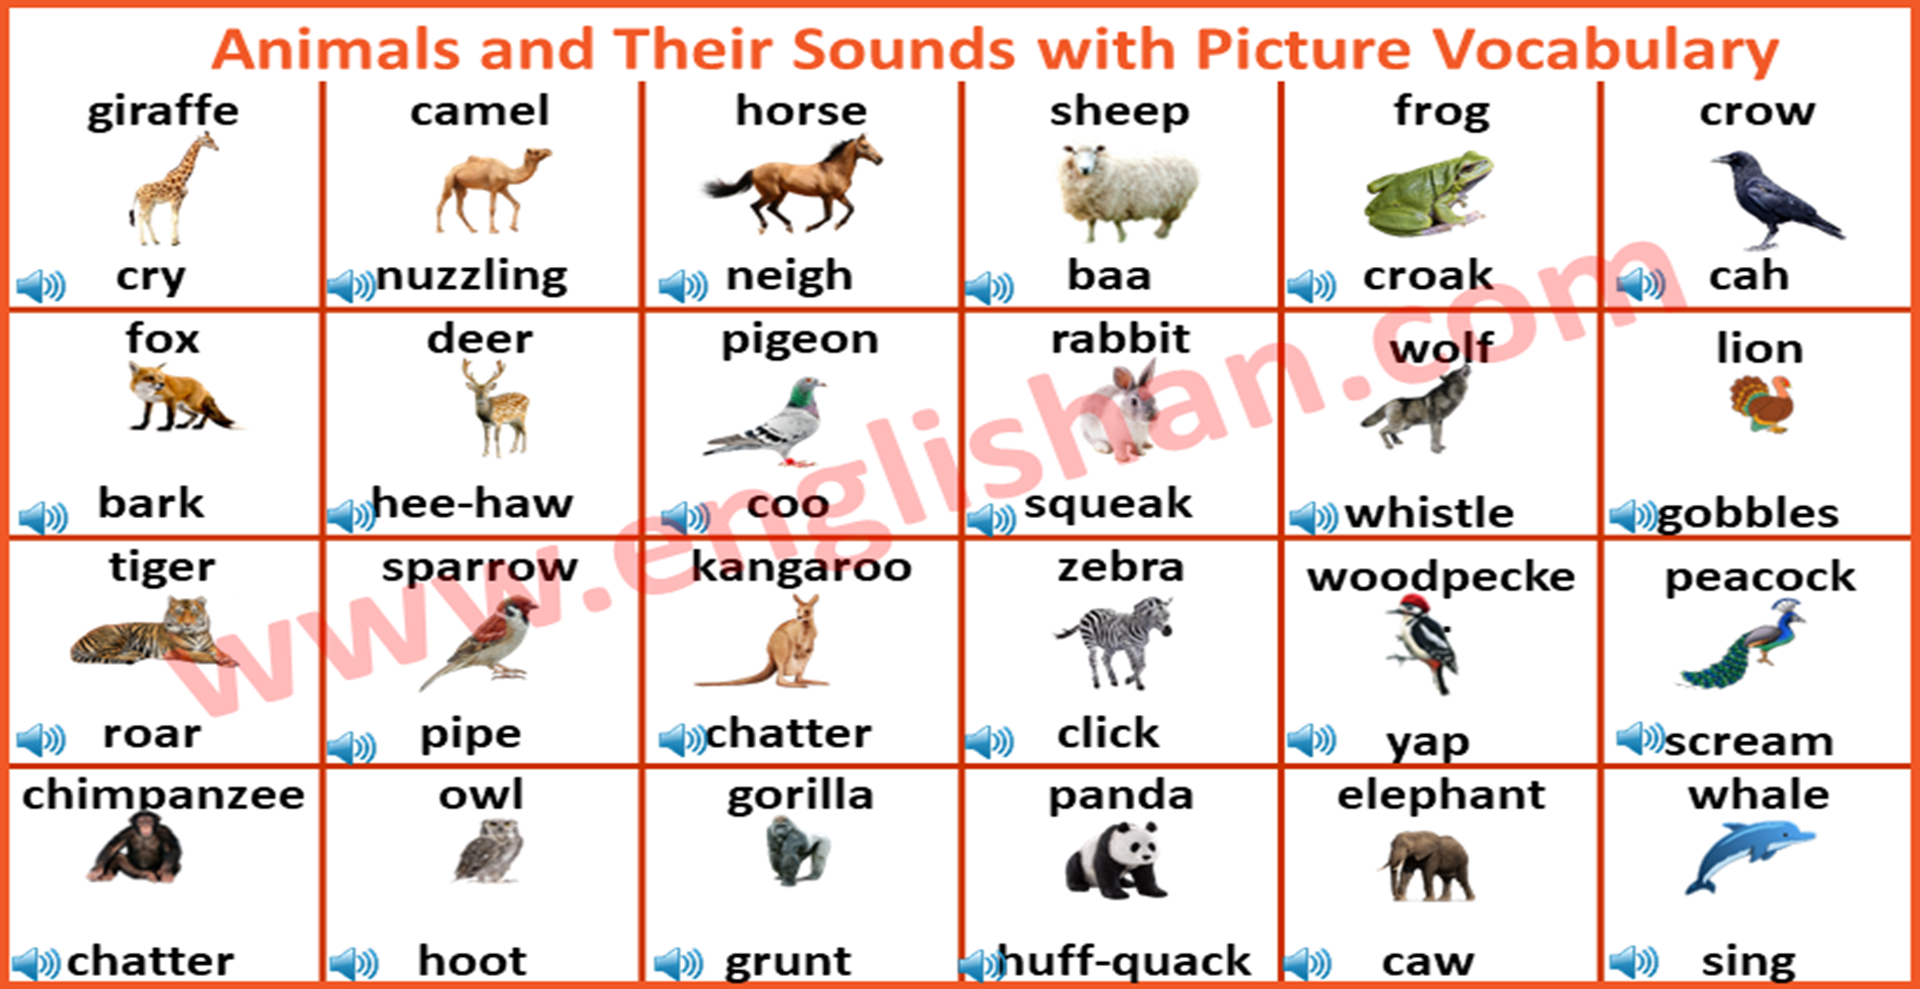 What are the different types of animal sounds?